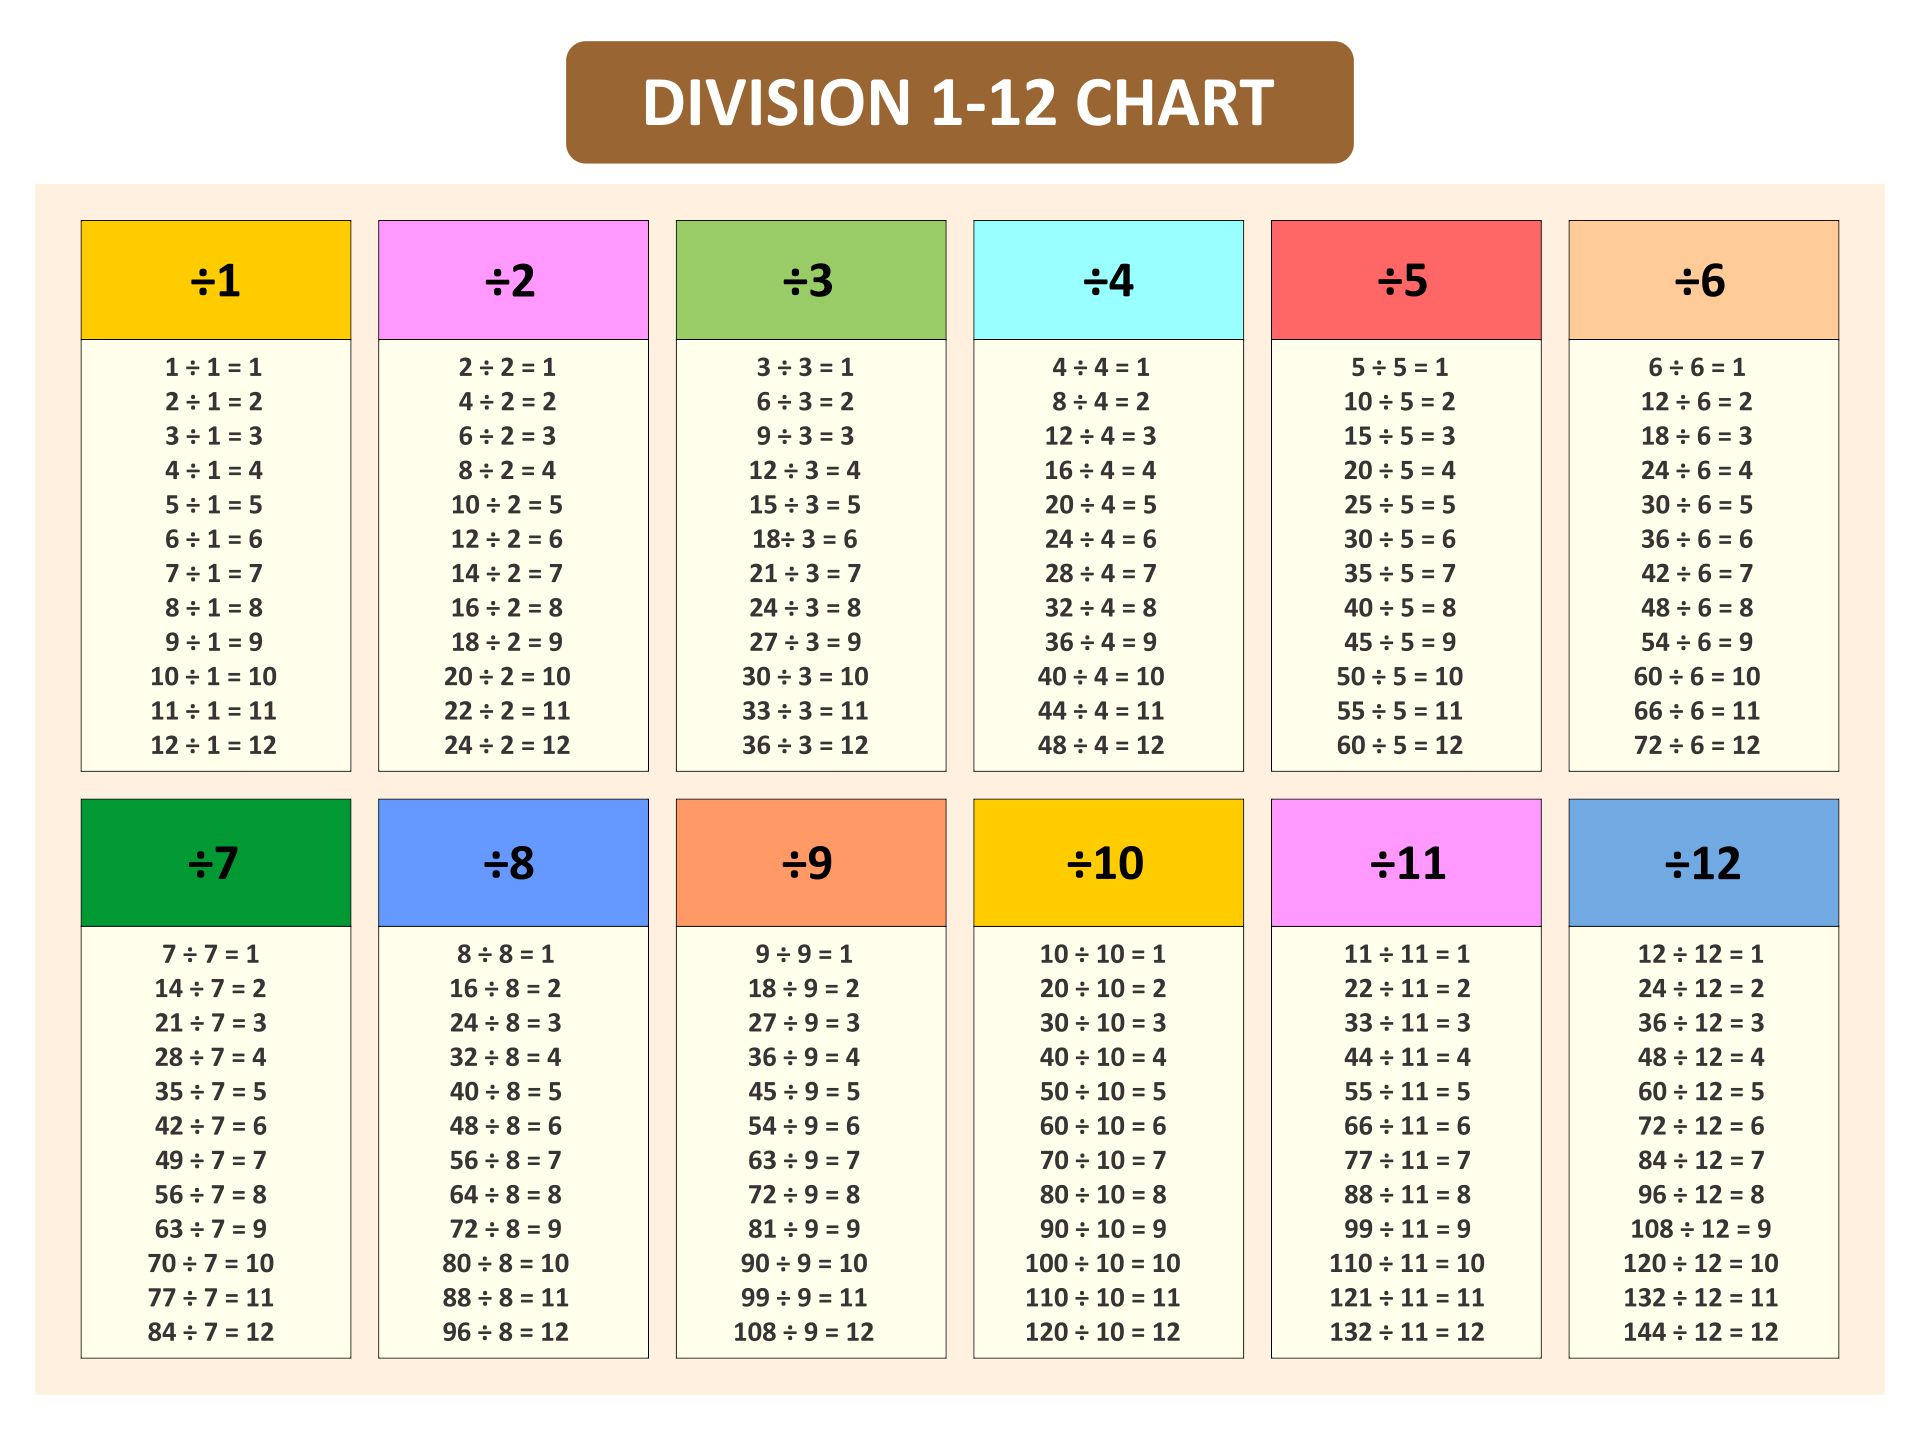 Division Times Table